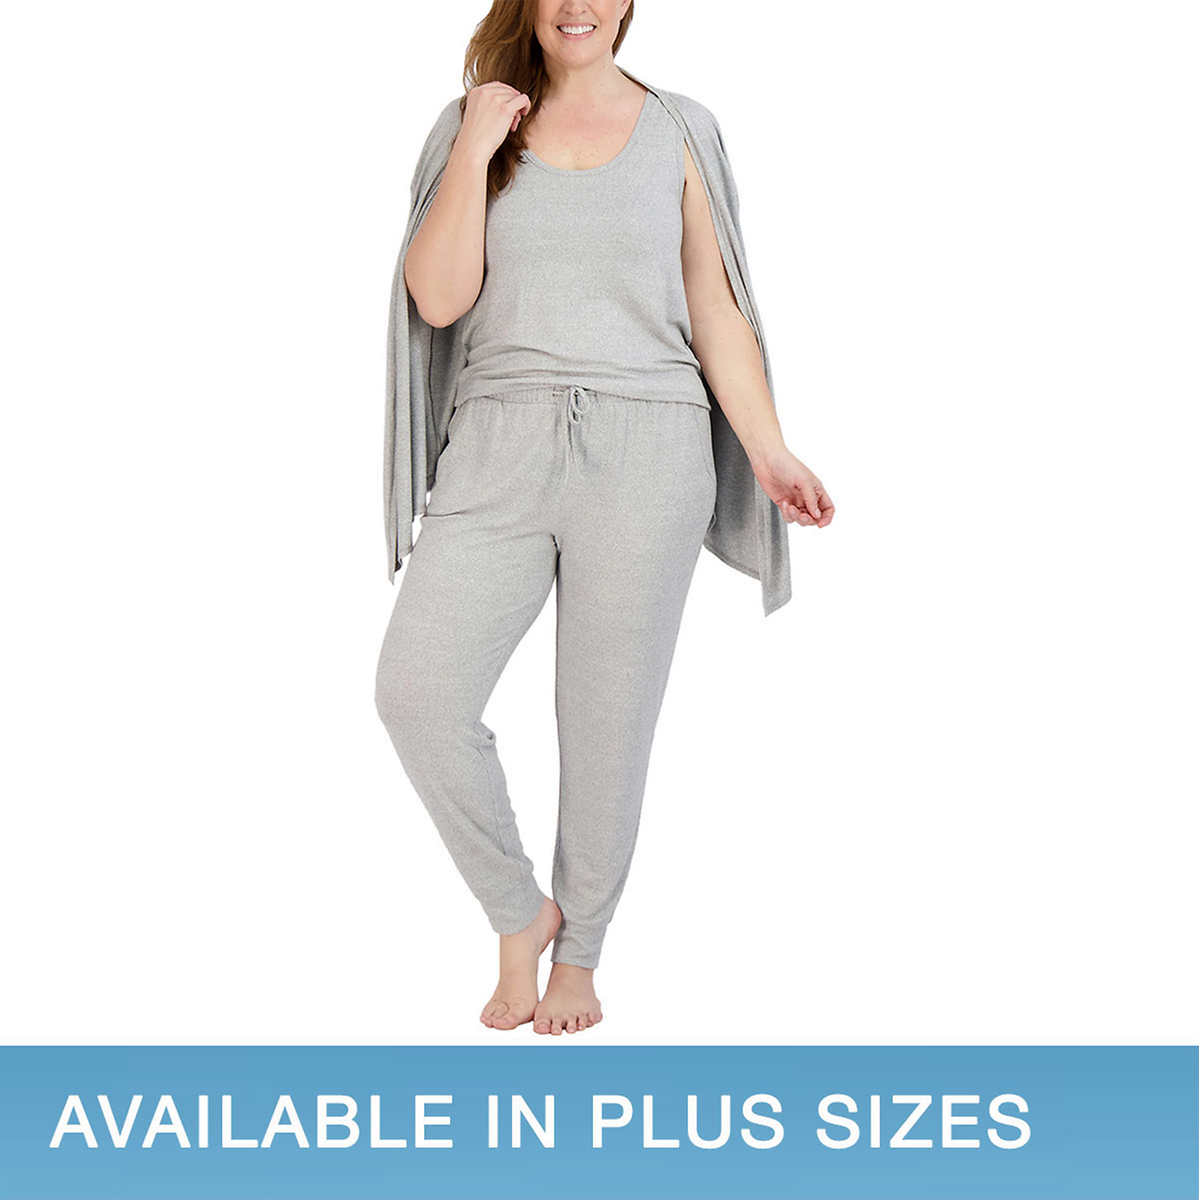 Lolë women's lounge pant, 2-pack offer at Costco